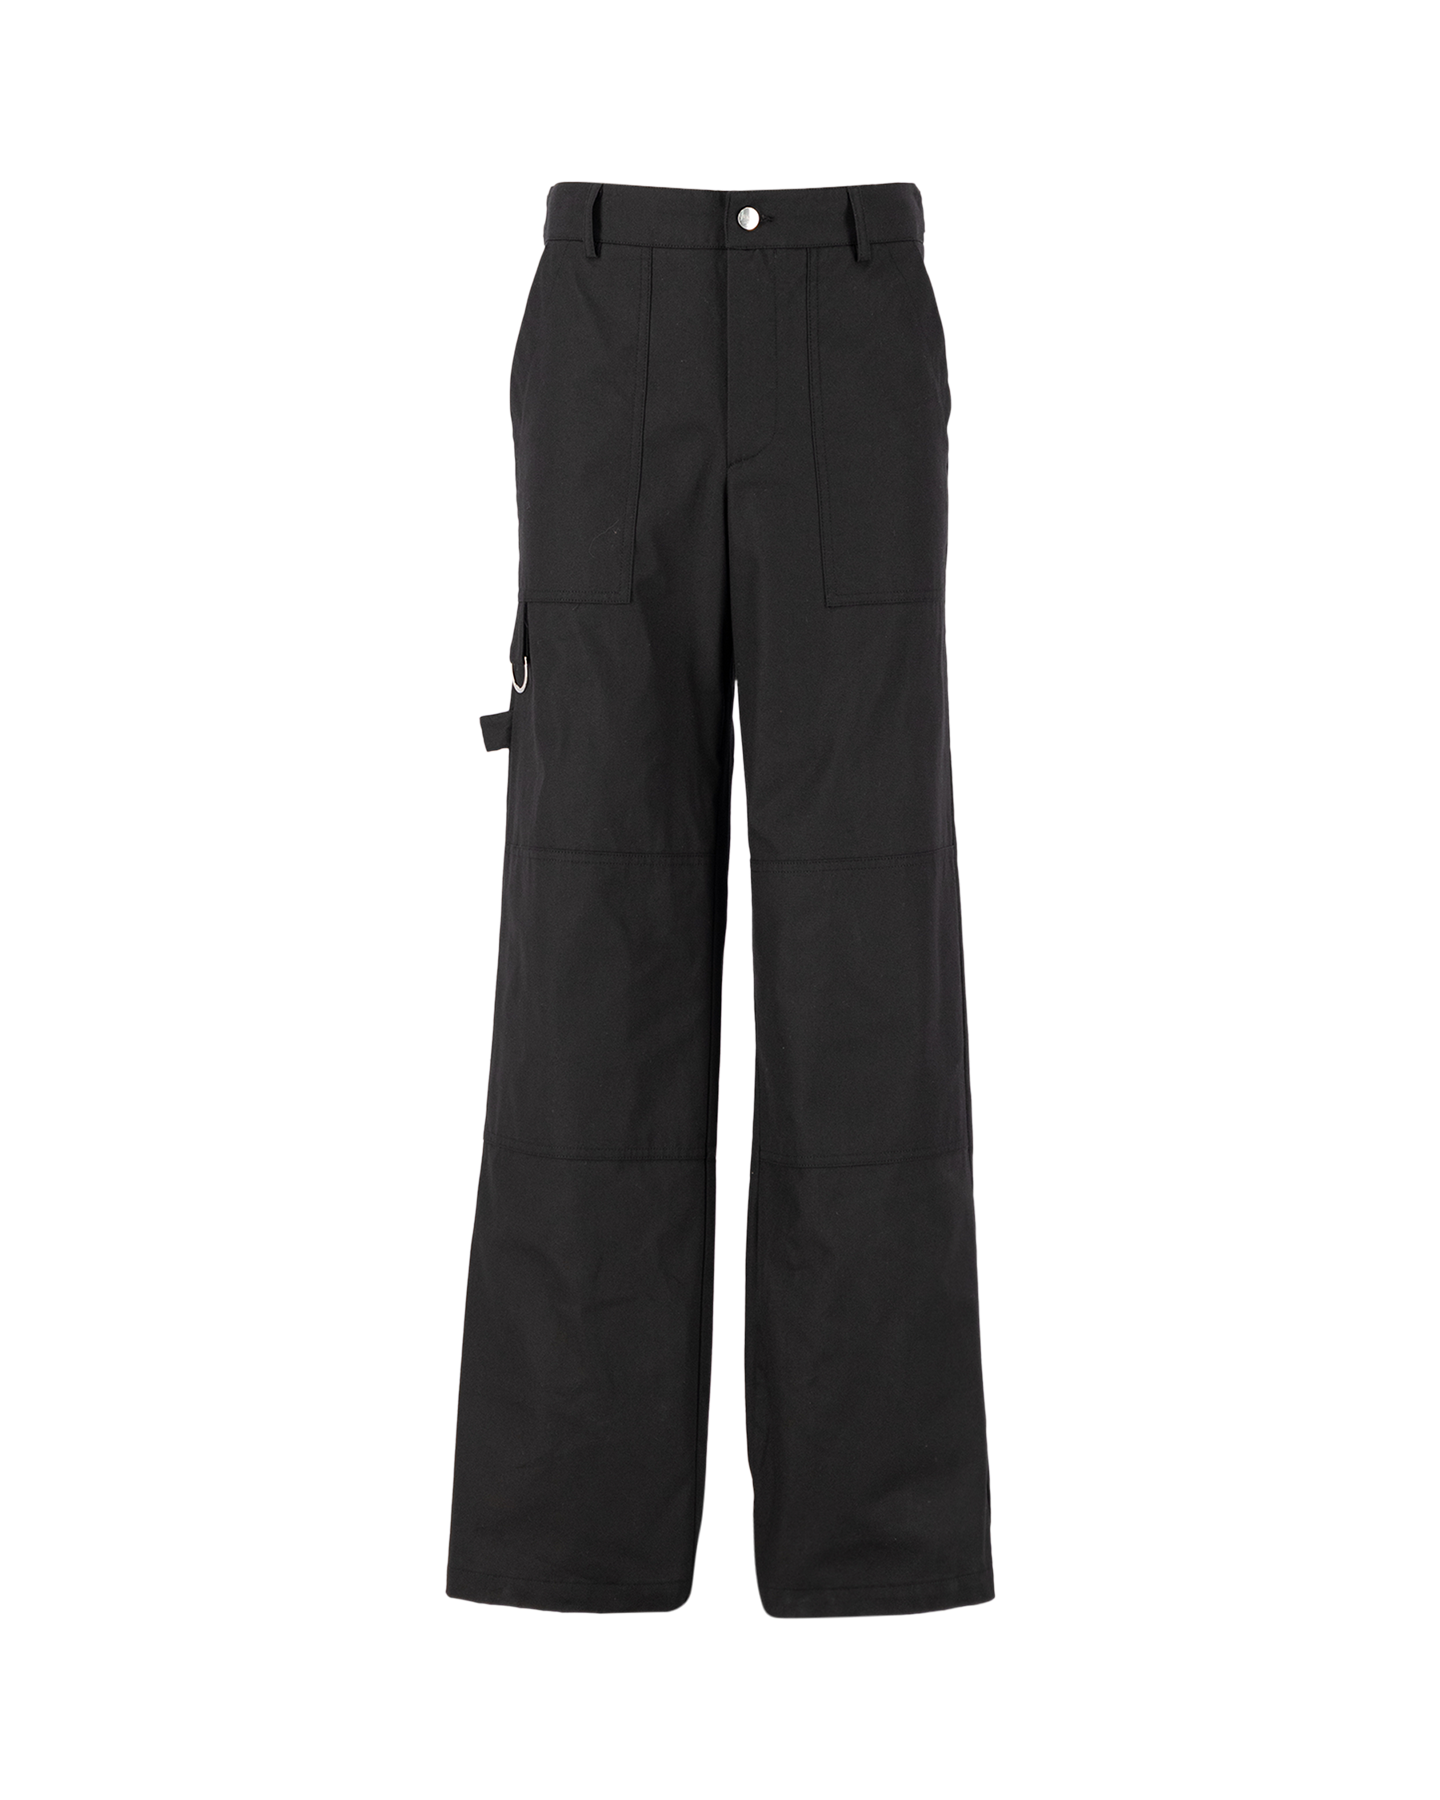 Division Knee Patch Pants Solid ZWART 1